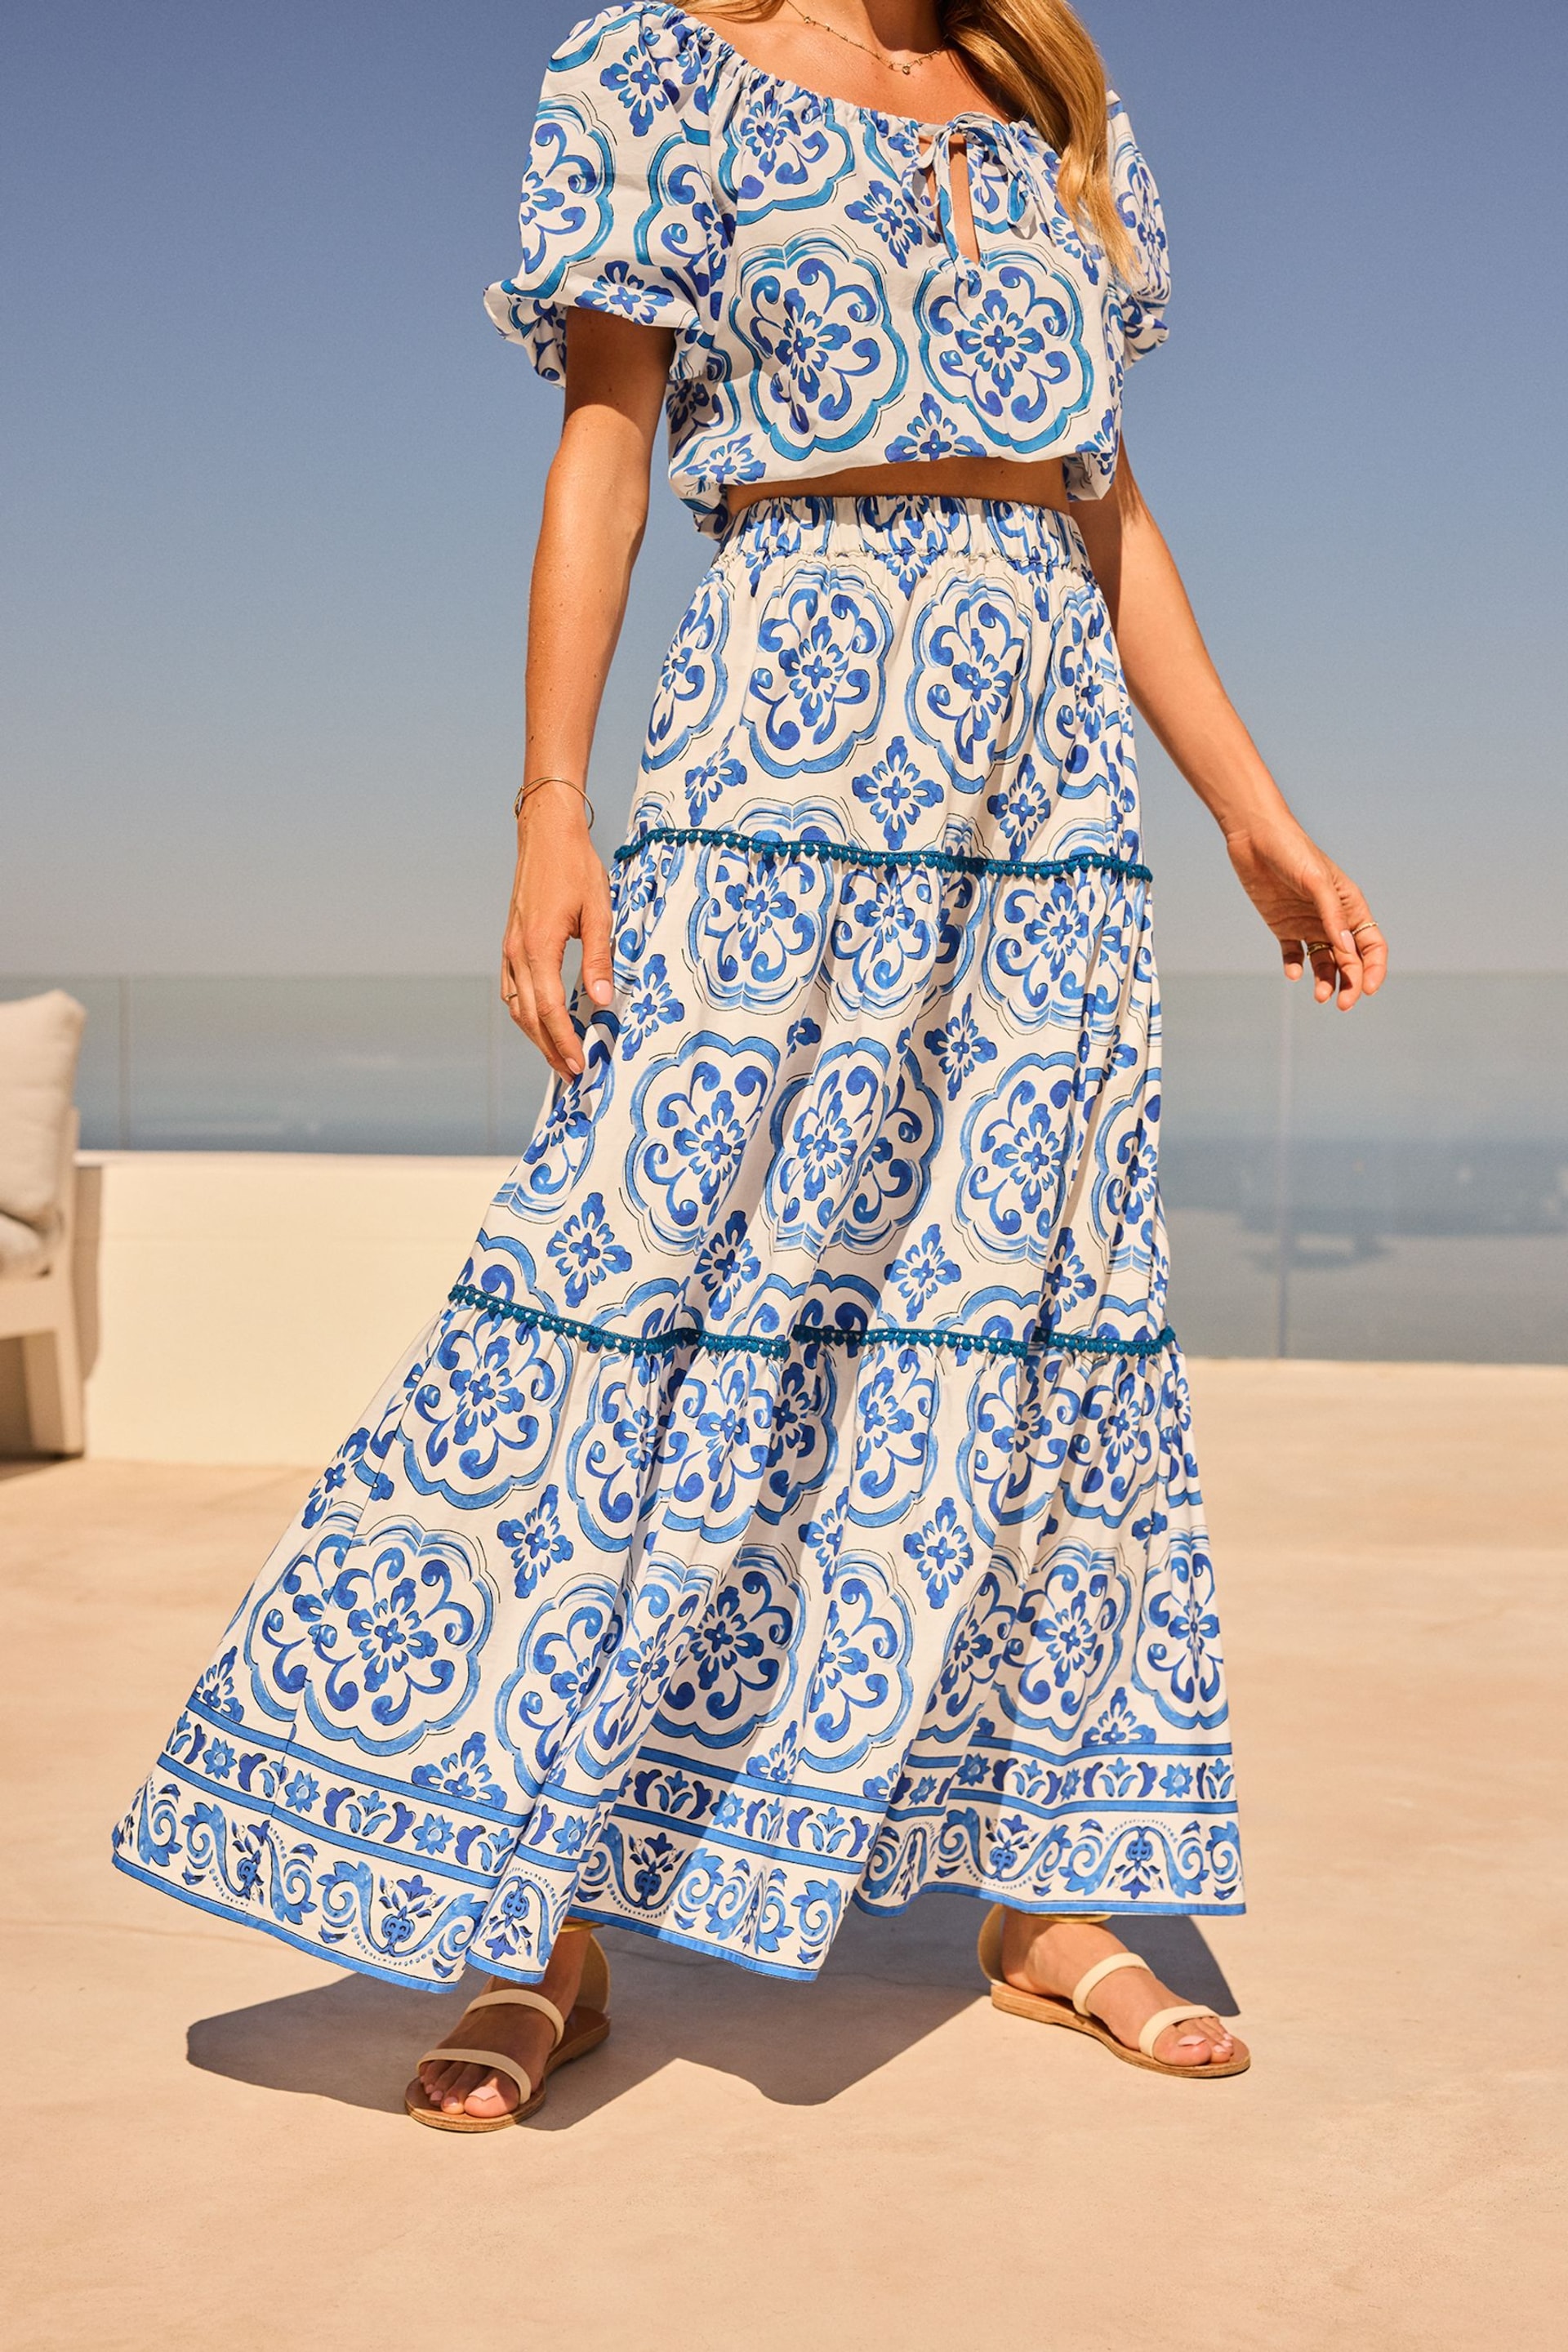 Friends Like These Blue Floral Tiered Cotton Maxi Skirt - Image 1 of 5